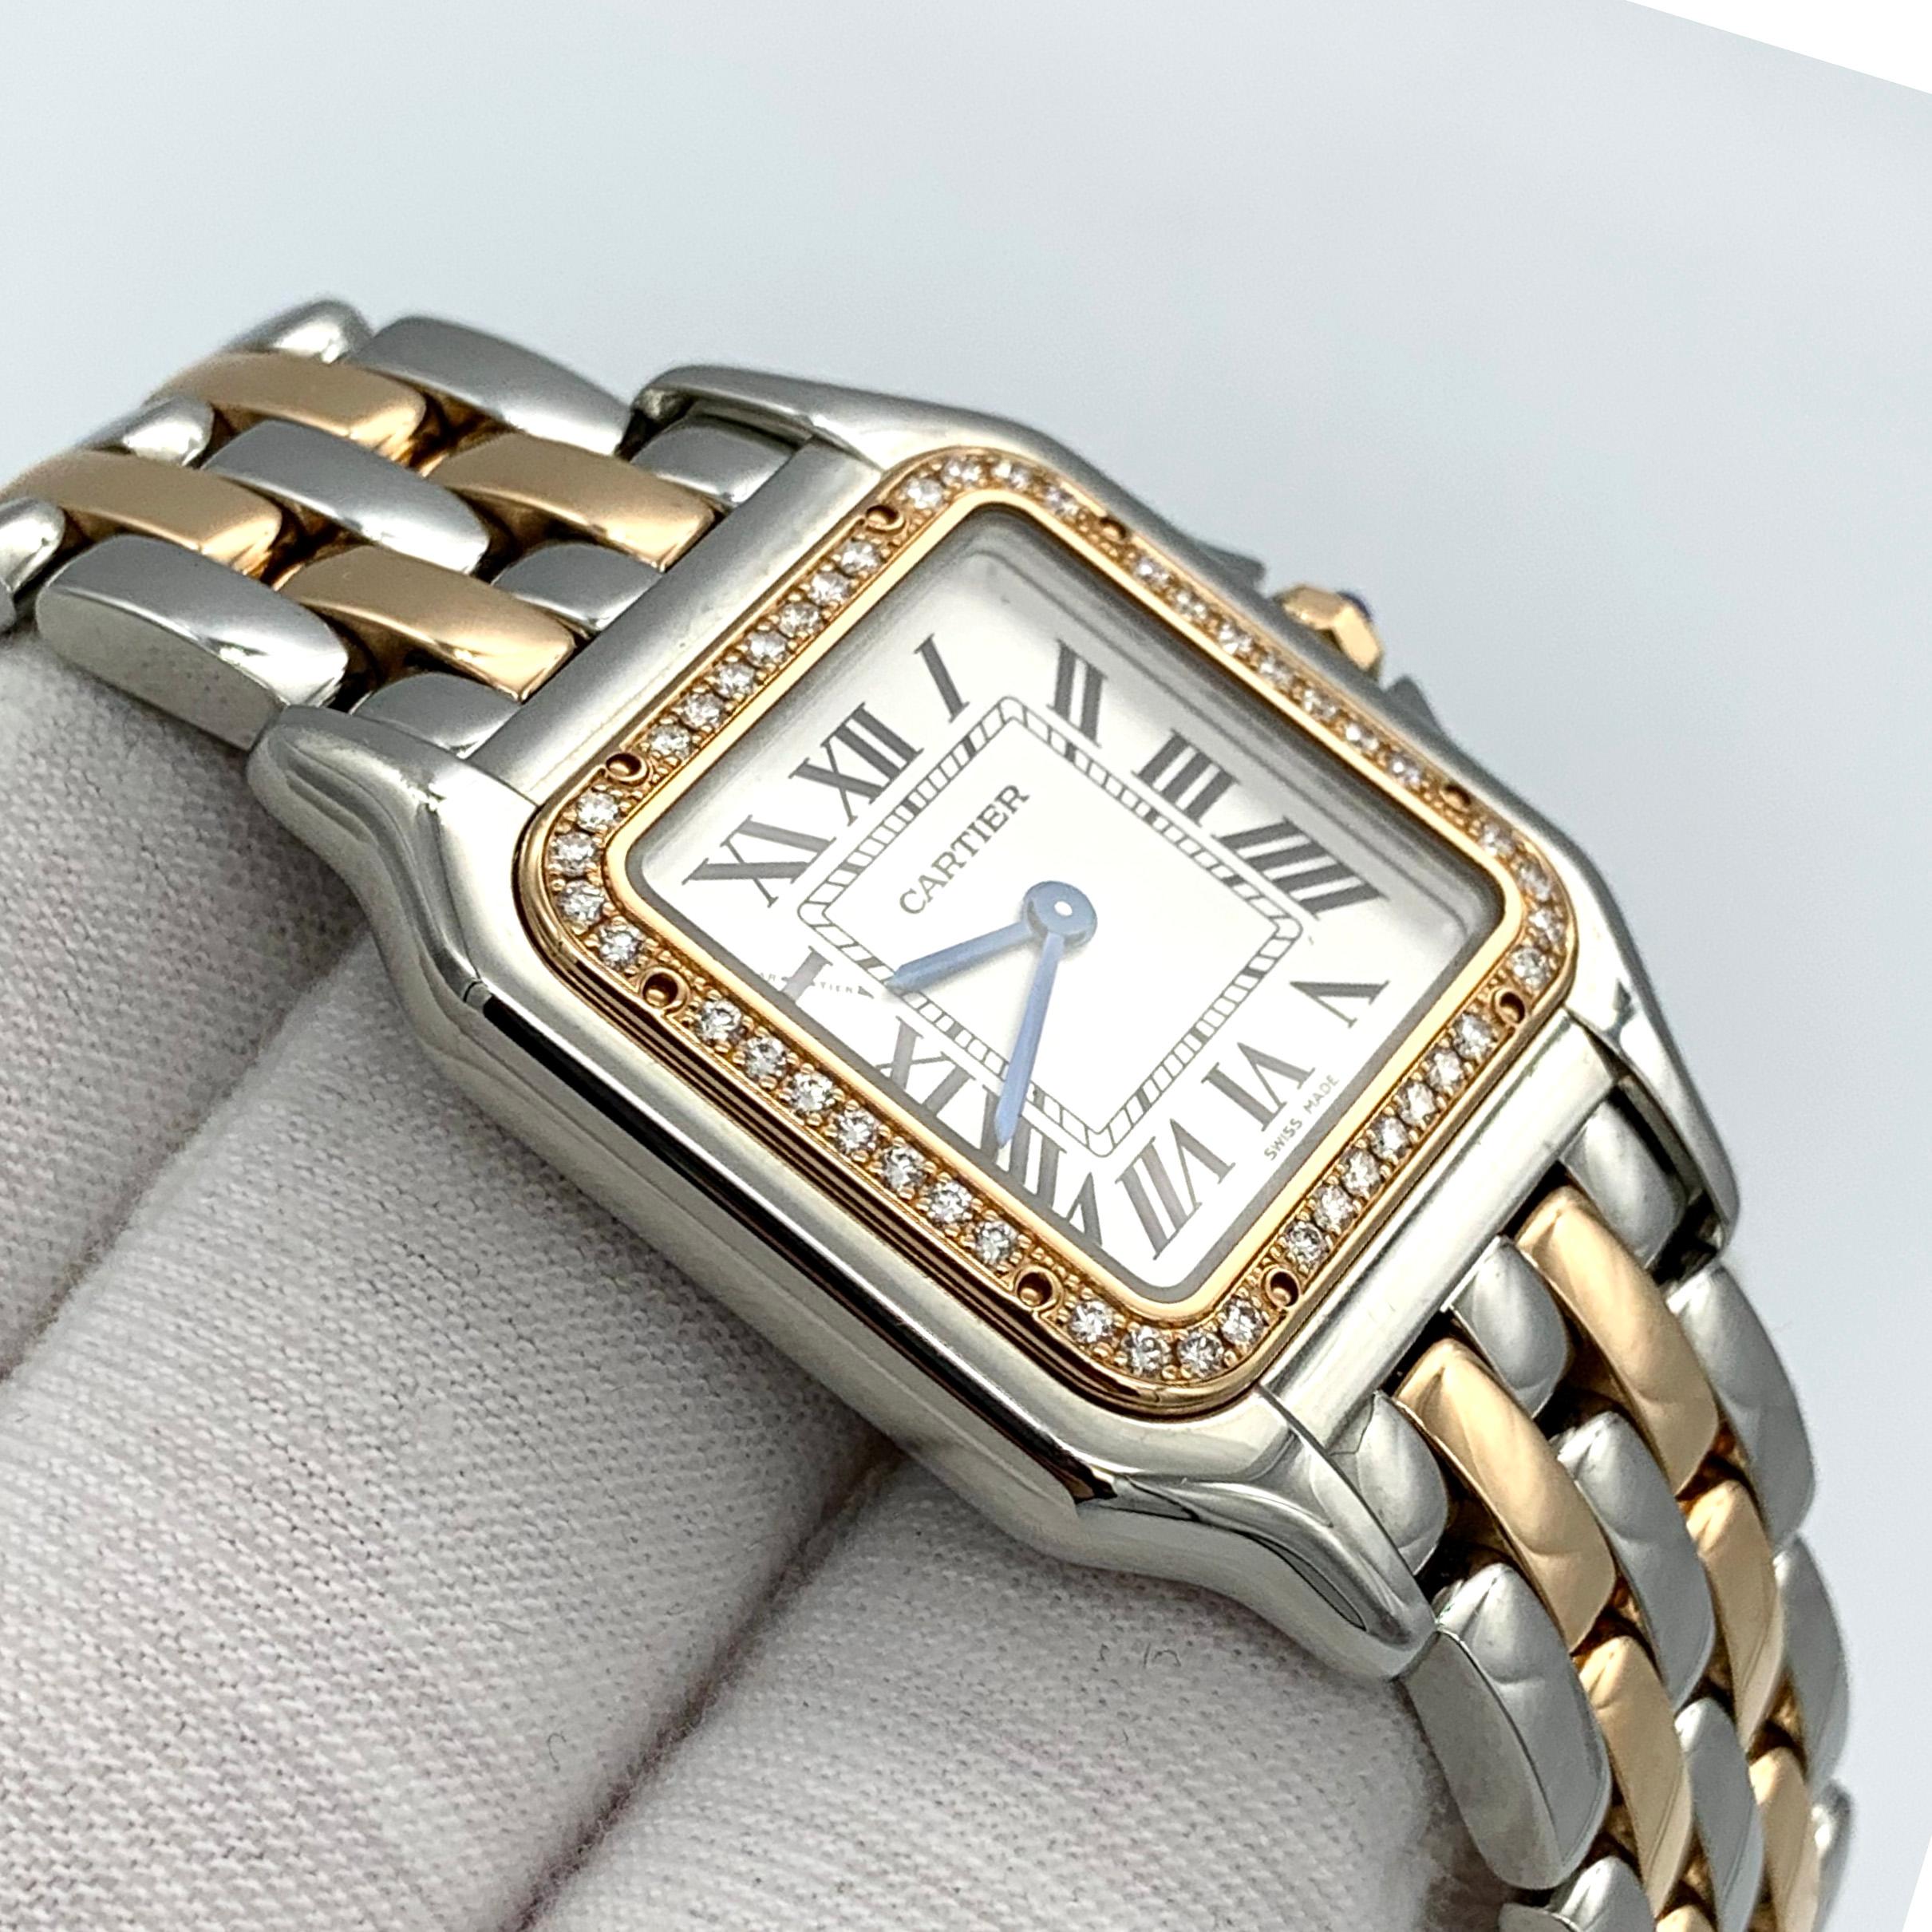 Panthère de Cartier watch, medium model, quartz movement. Case in rose gold 750/1000 and steel, bezel set with brilliant-cut diamonds, dimensions: 29 mm x 37 mm, thickness: 6 mm, crown set with a synthetic blue spinel, silvered dial, blued-steel